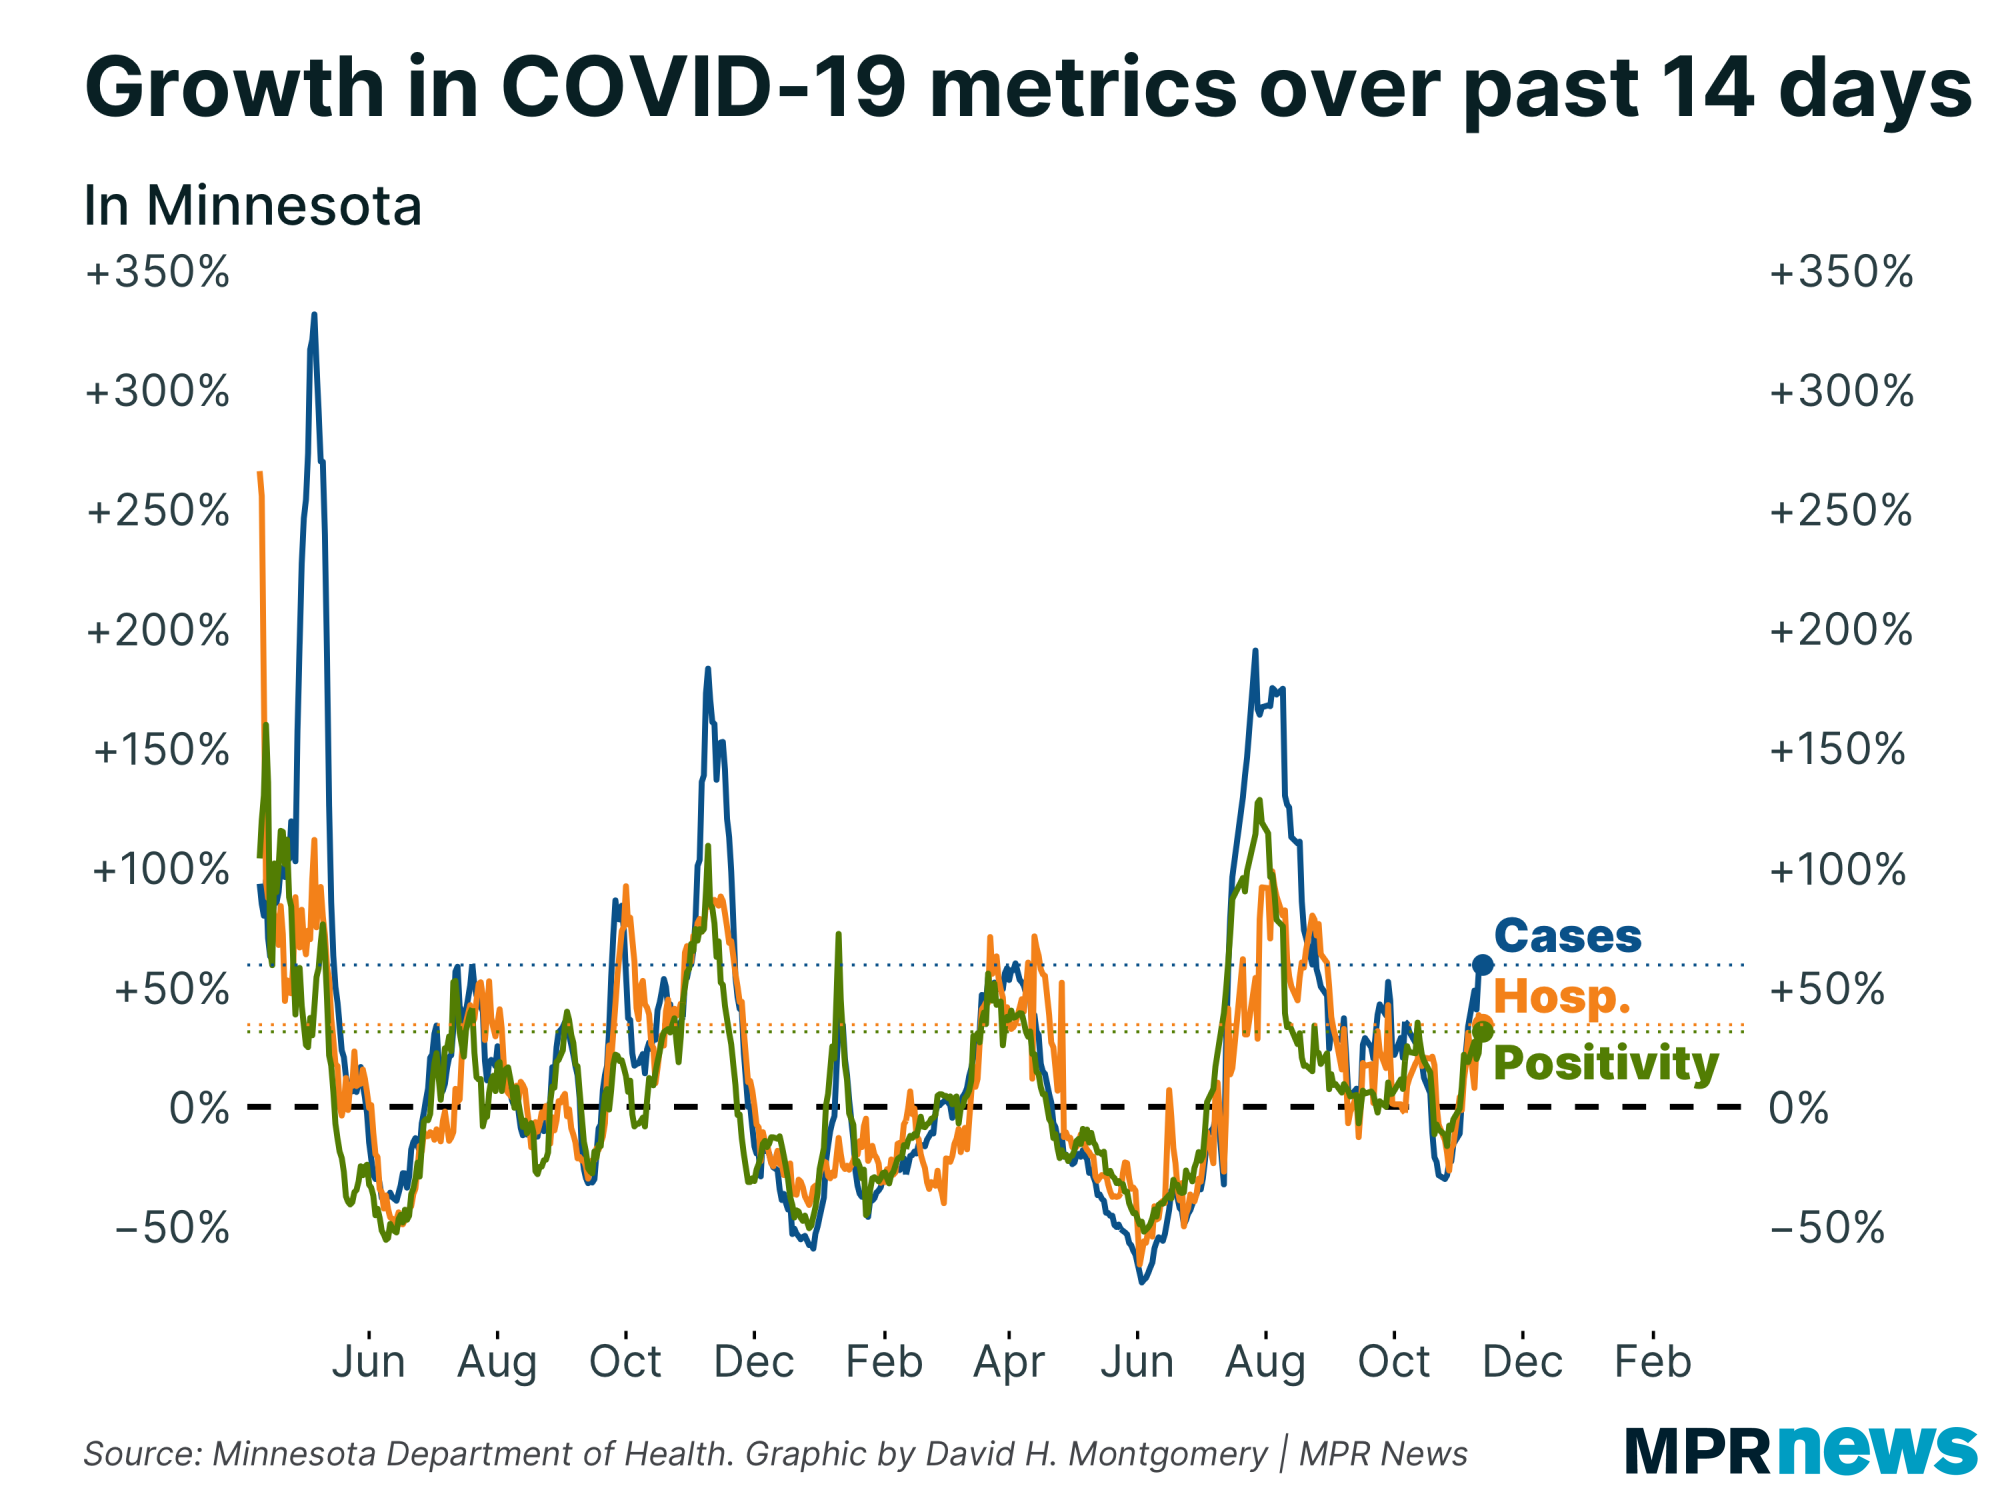 Graph of the growth in COVID-19 metrics over the past 14 days